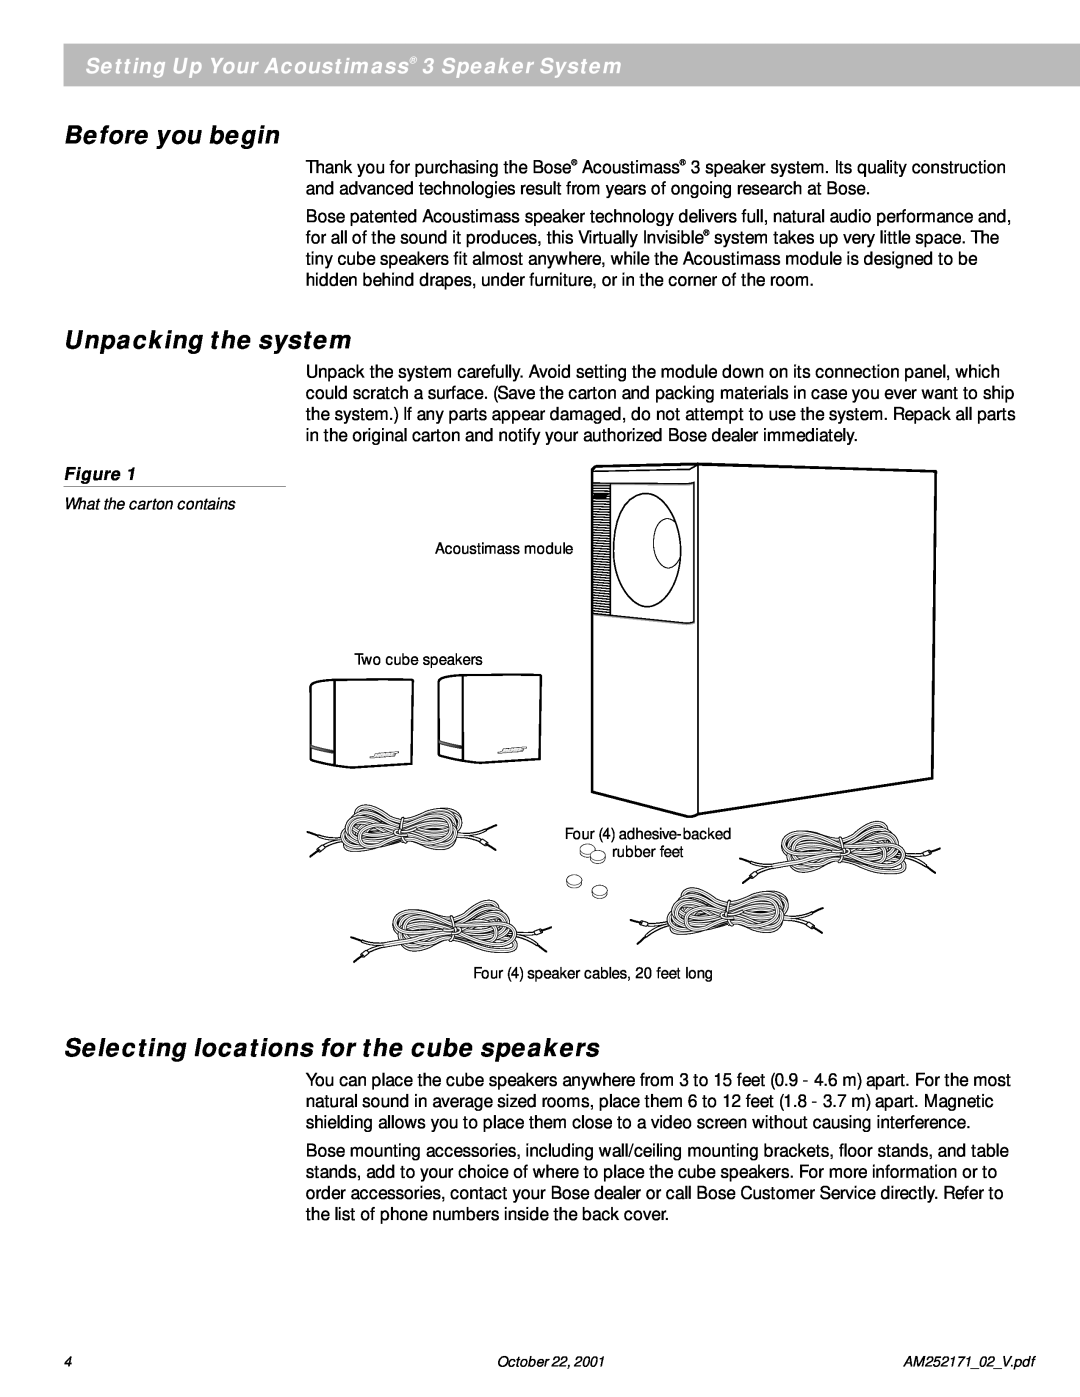 Bose 3 Series manual Before you begin, Unpacking the system, Selecting locations for the cube speakers 